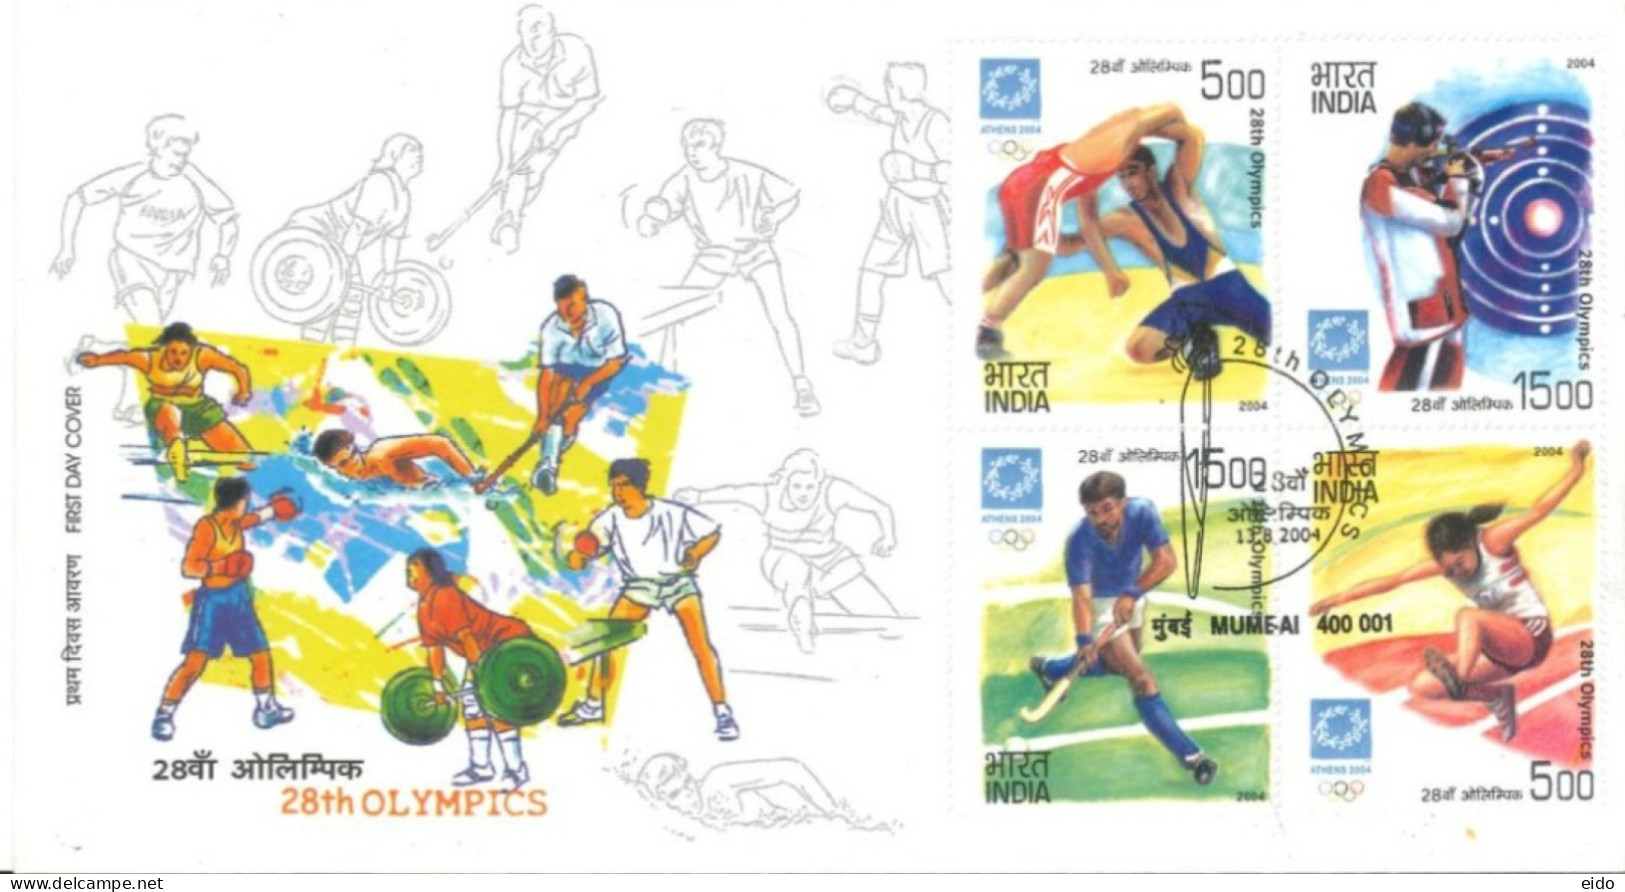 INDIA - 2004 - FDC STAMPS OF 28th OLYMPICS, ATHENS. - Covers & Documents